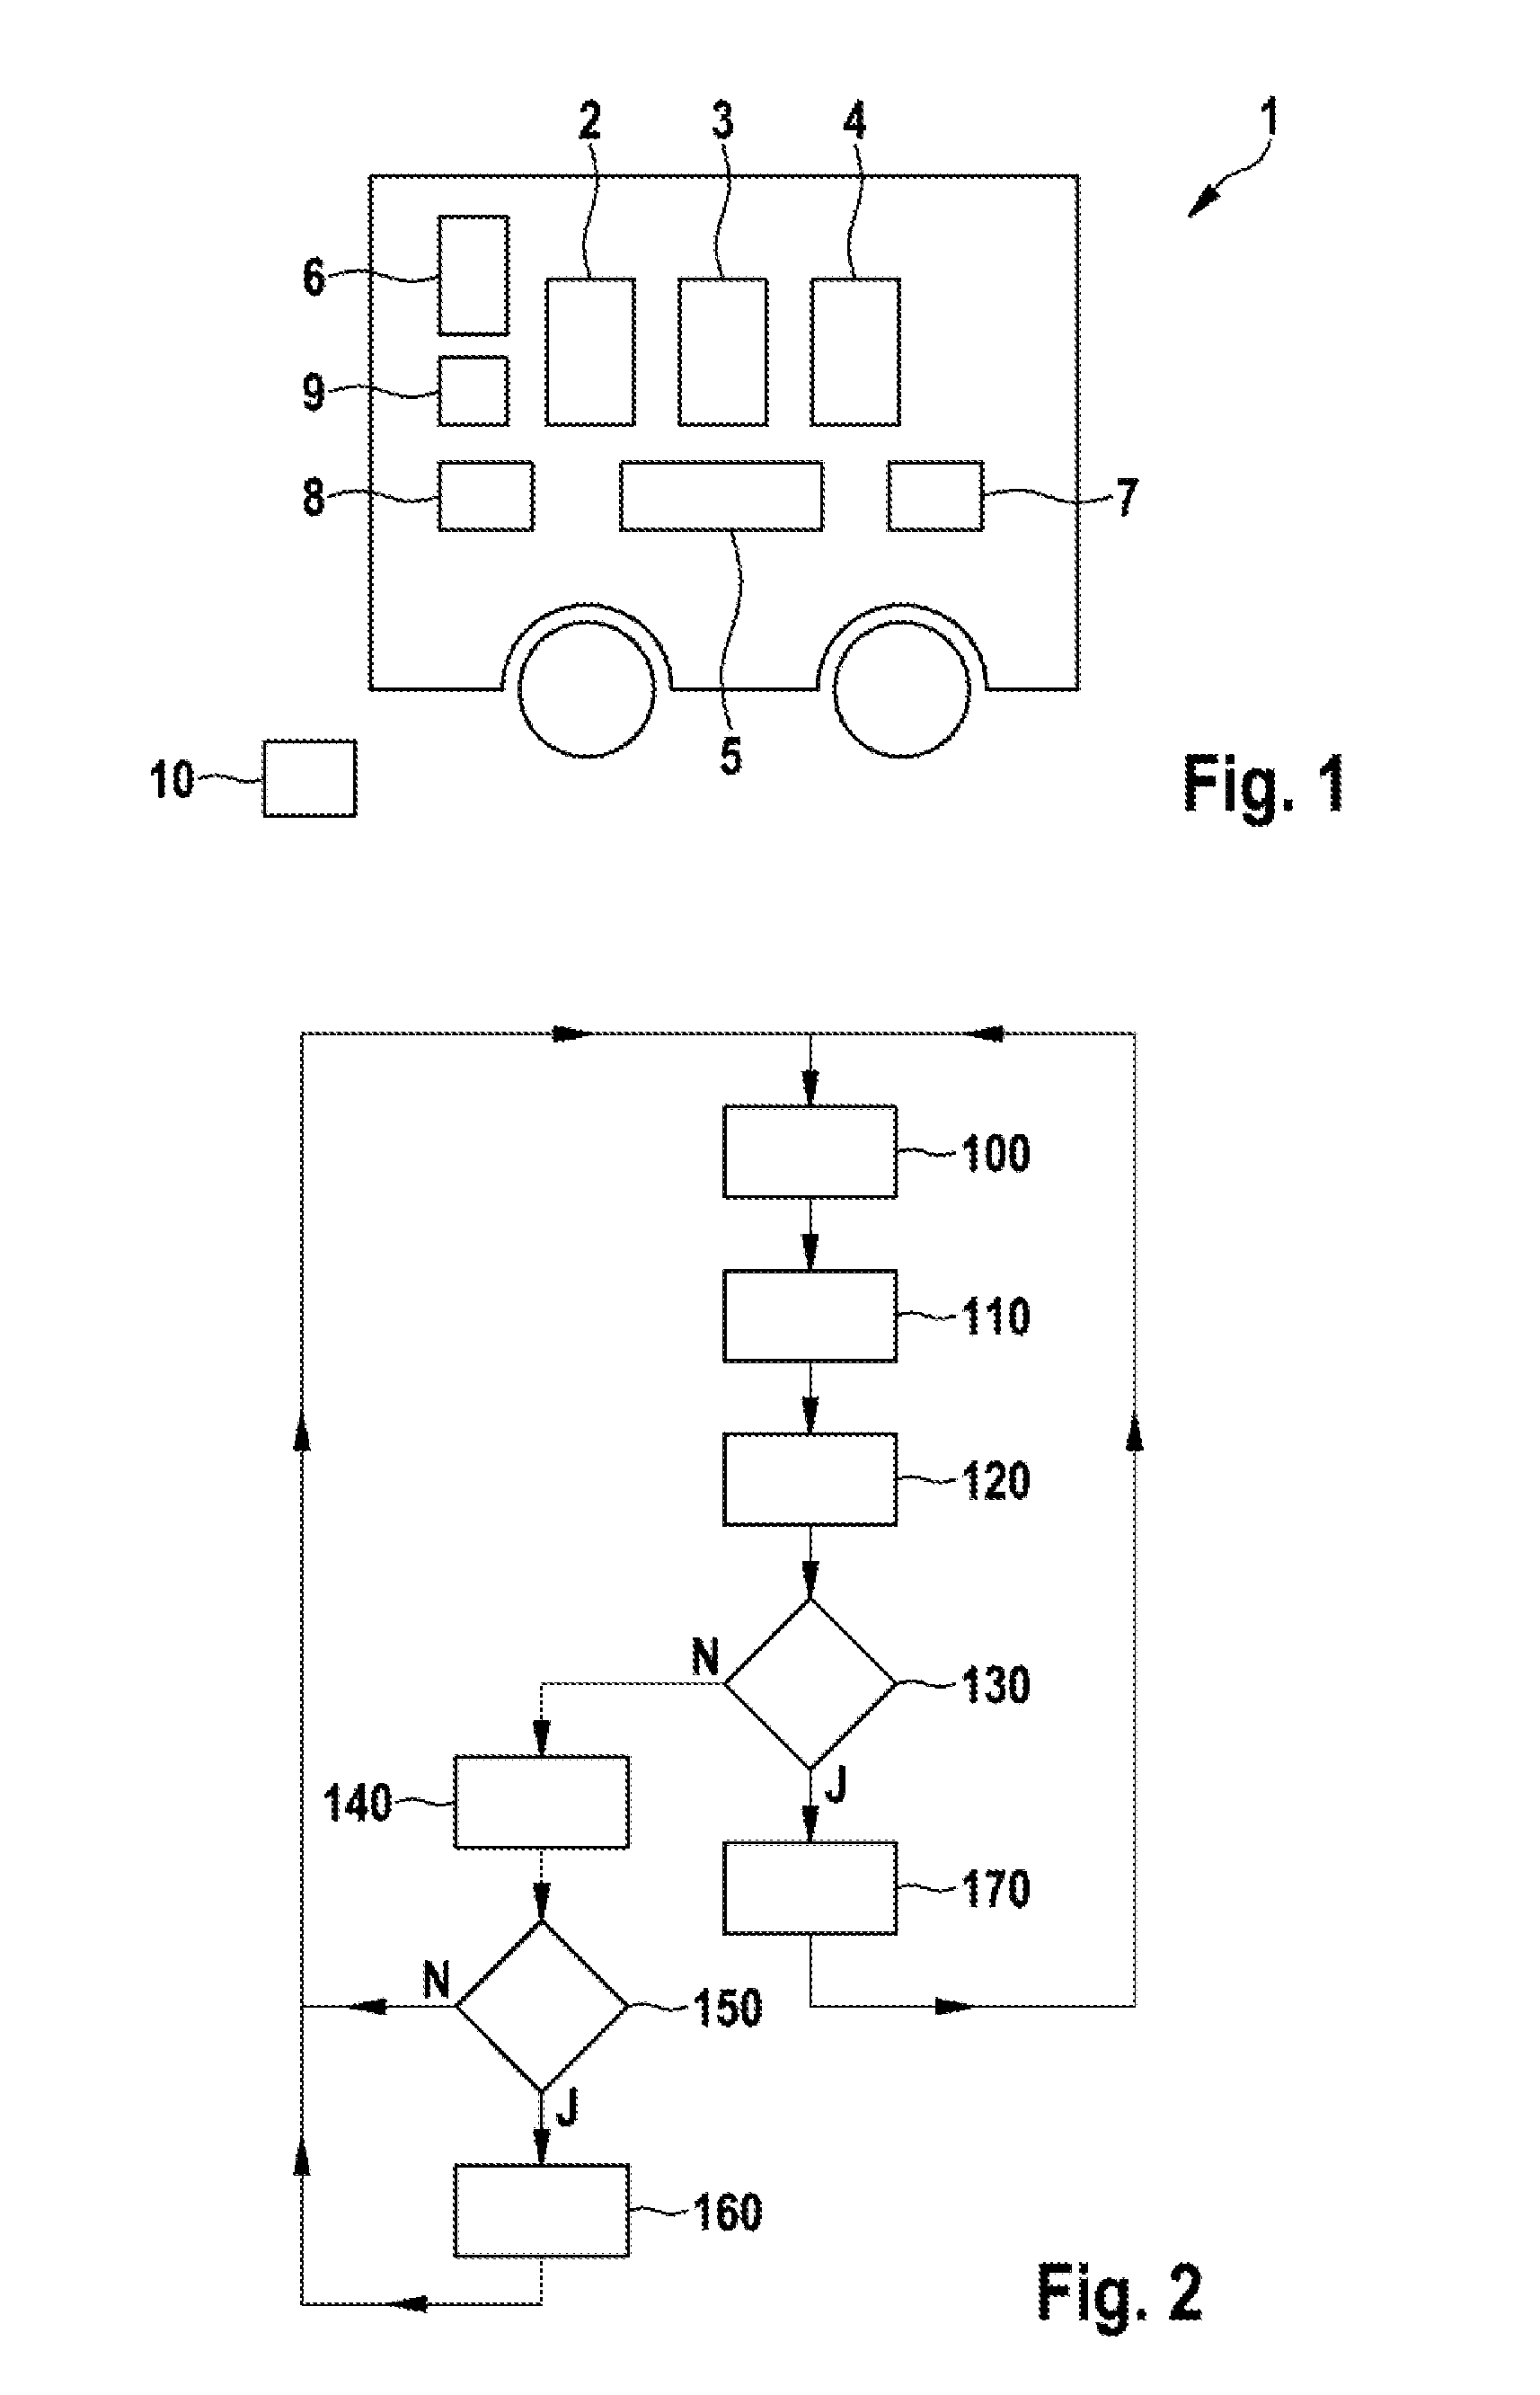 Method for activating a driver assistance system